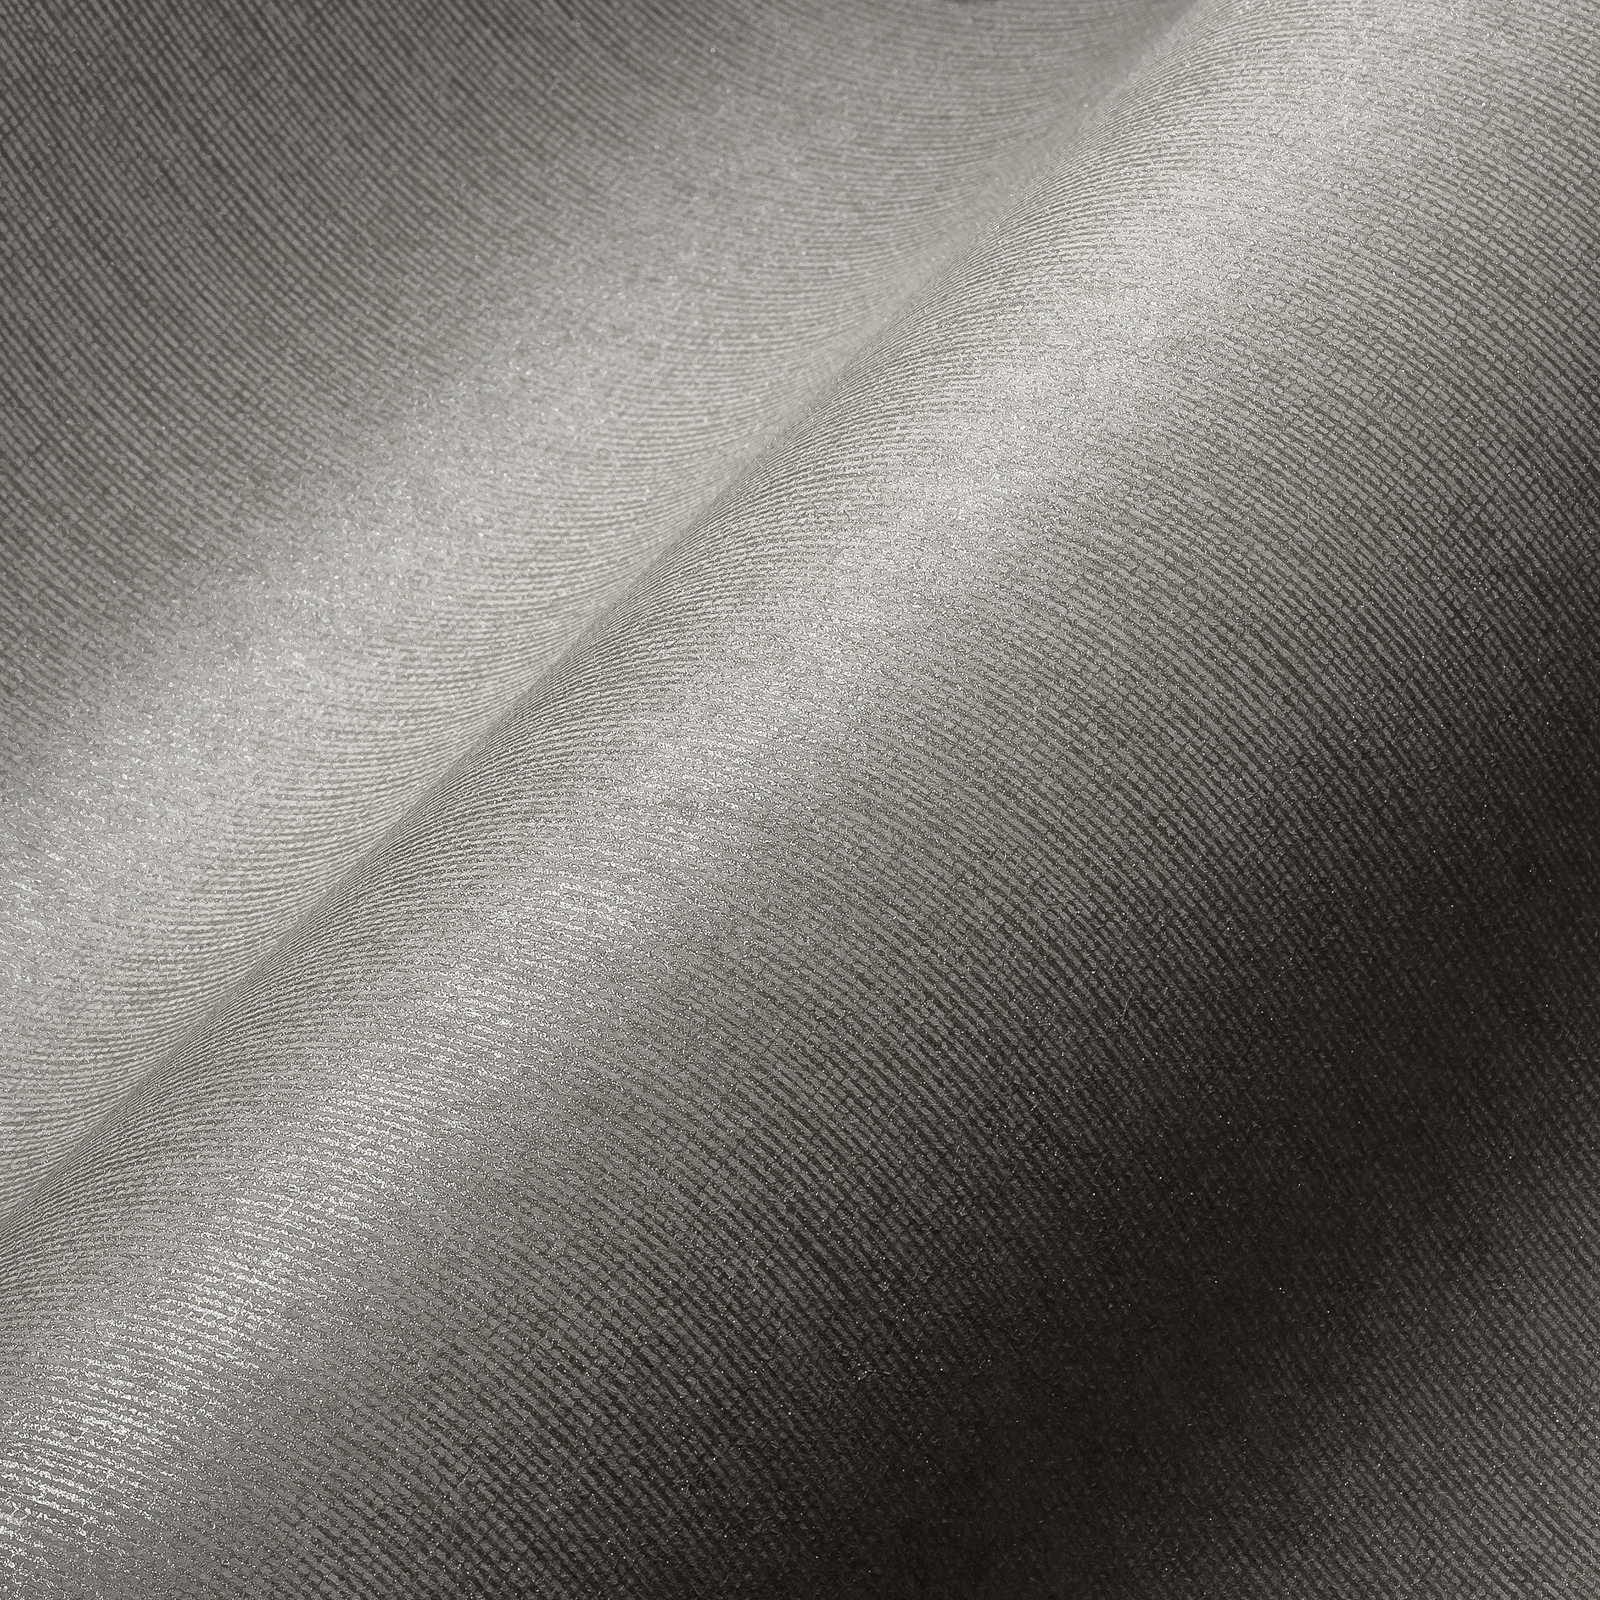             Gloss wallpaper with textile texture & shimmer effect - grey, brown
        